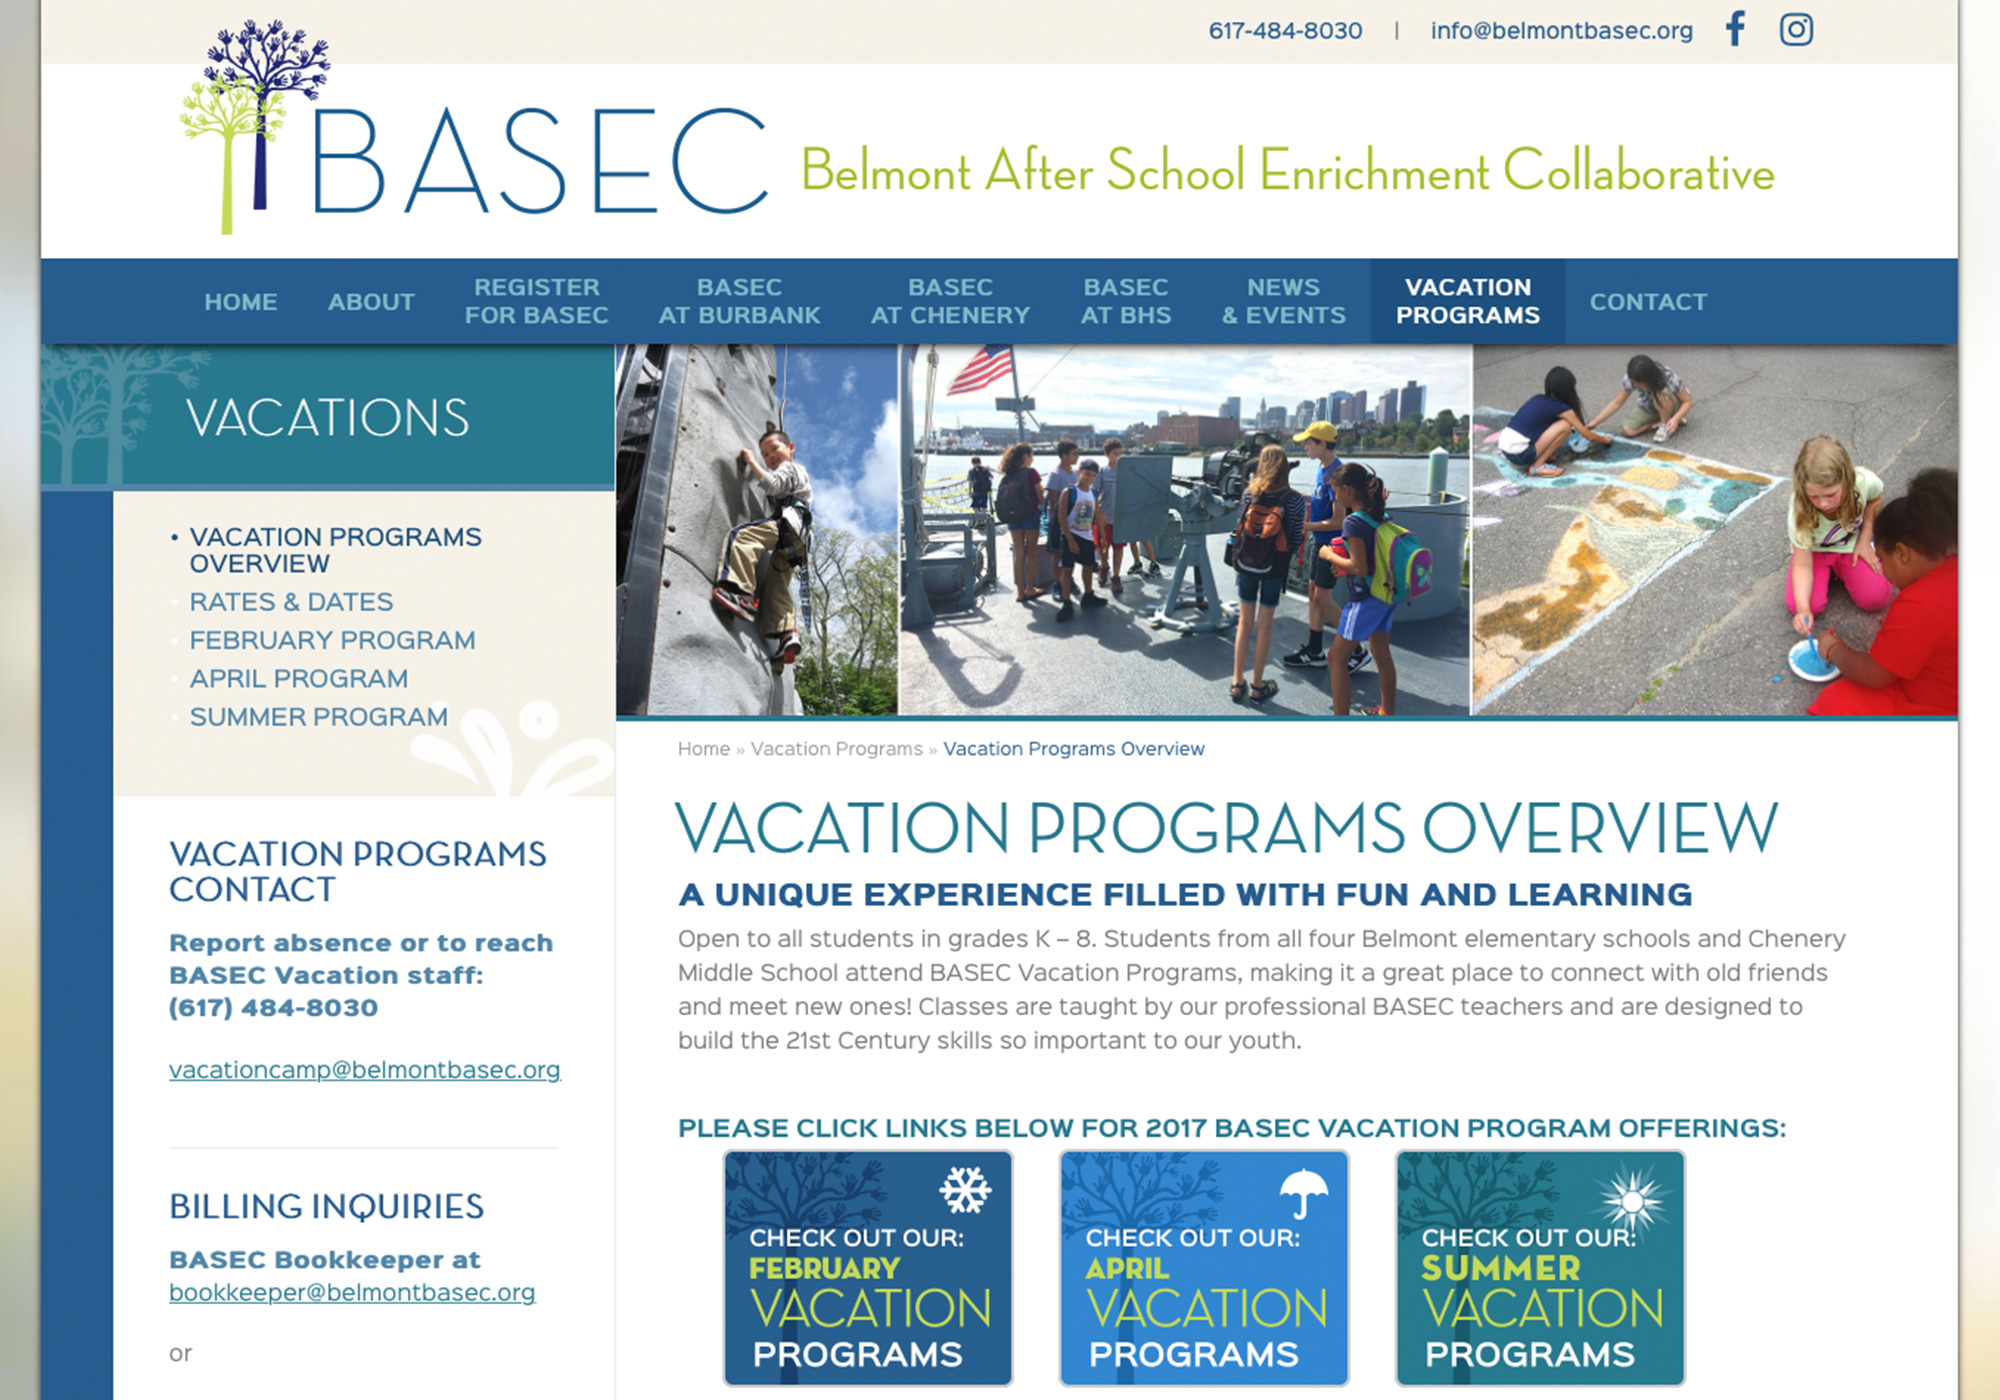 Vacation Programs has a specific look in this custom wordpress website design for the Belmont After School Enrichment Collaborative by Portland, Maine website design company, SlickFish Studios.